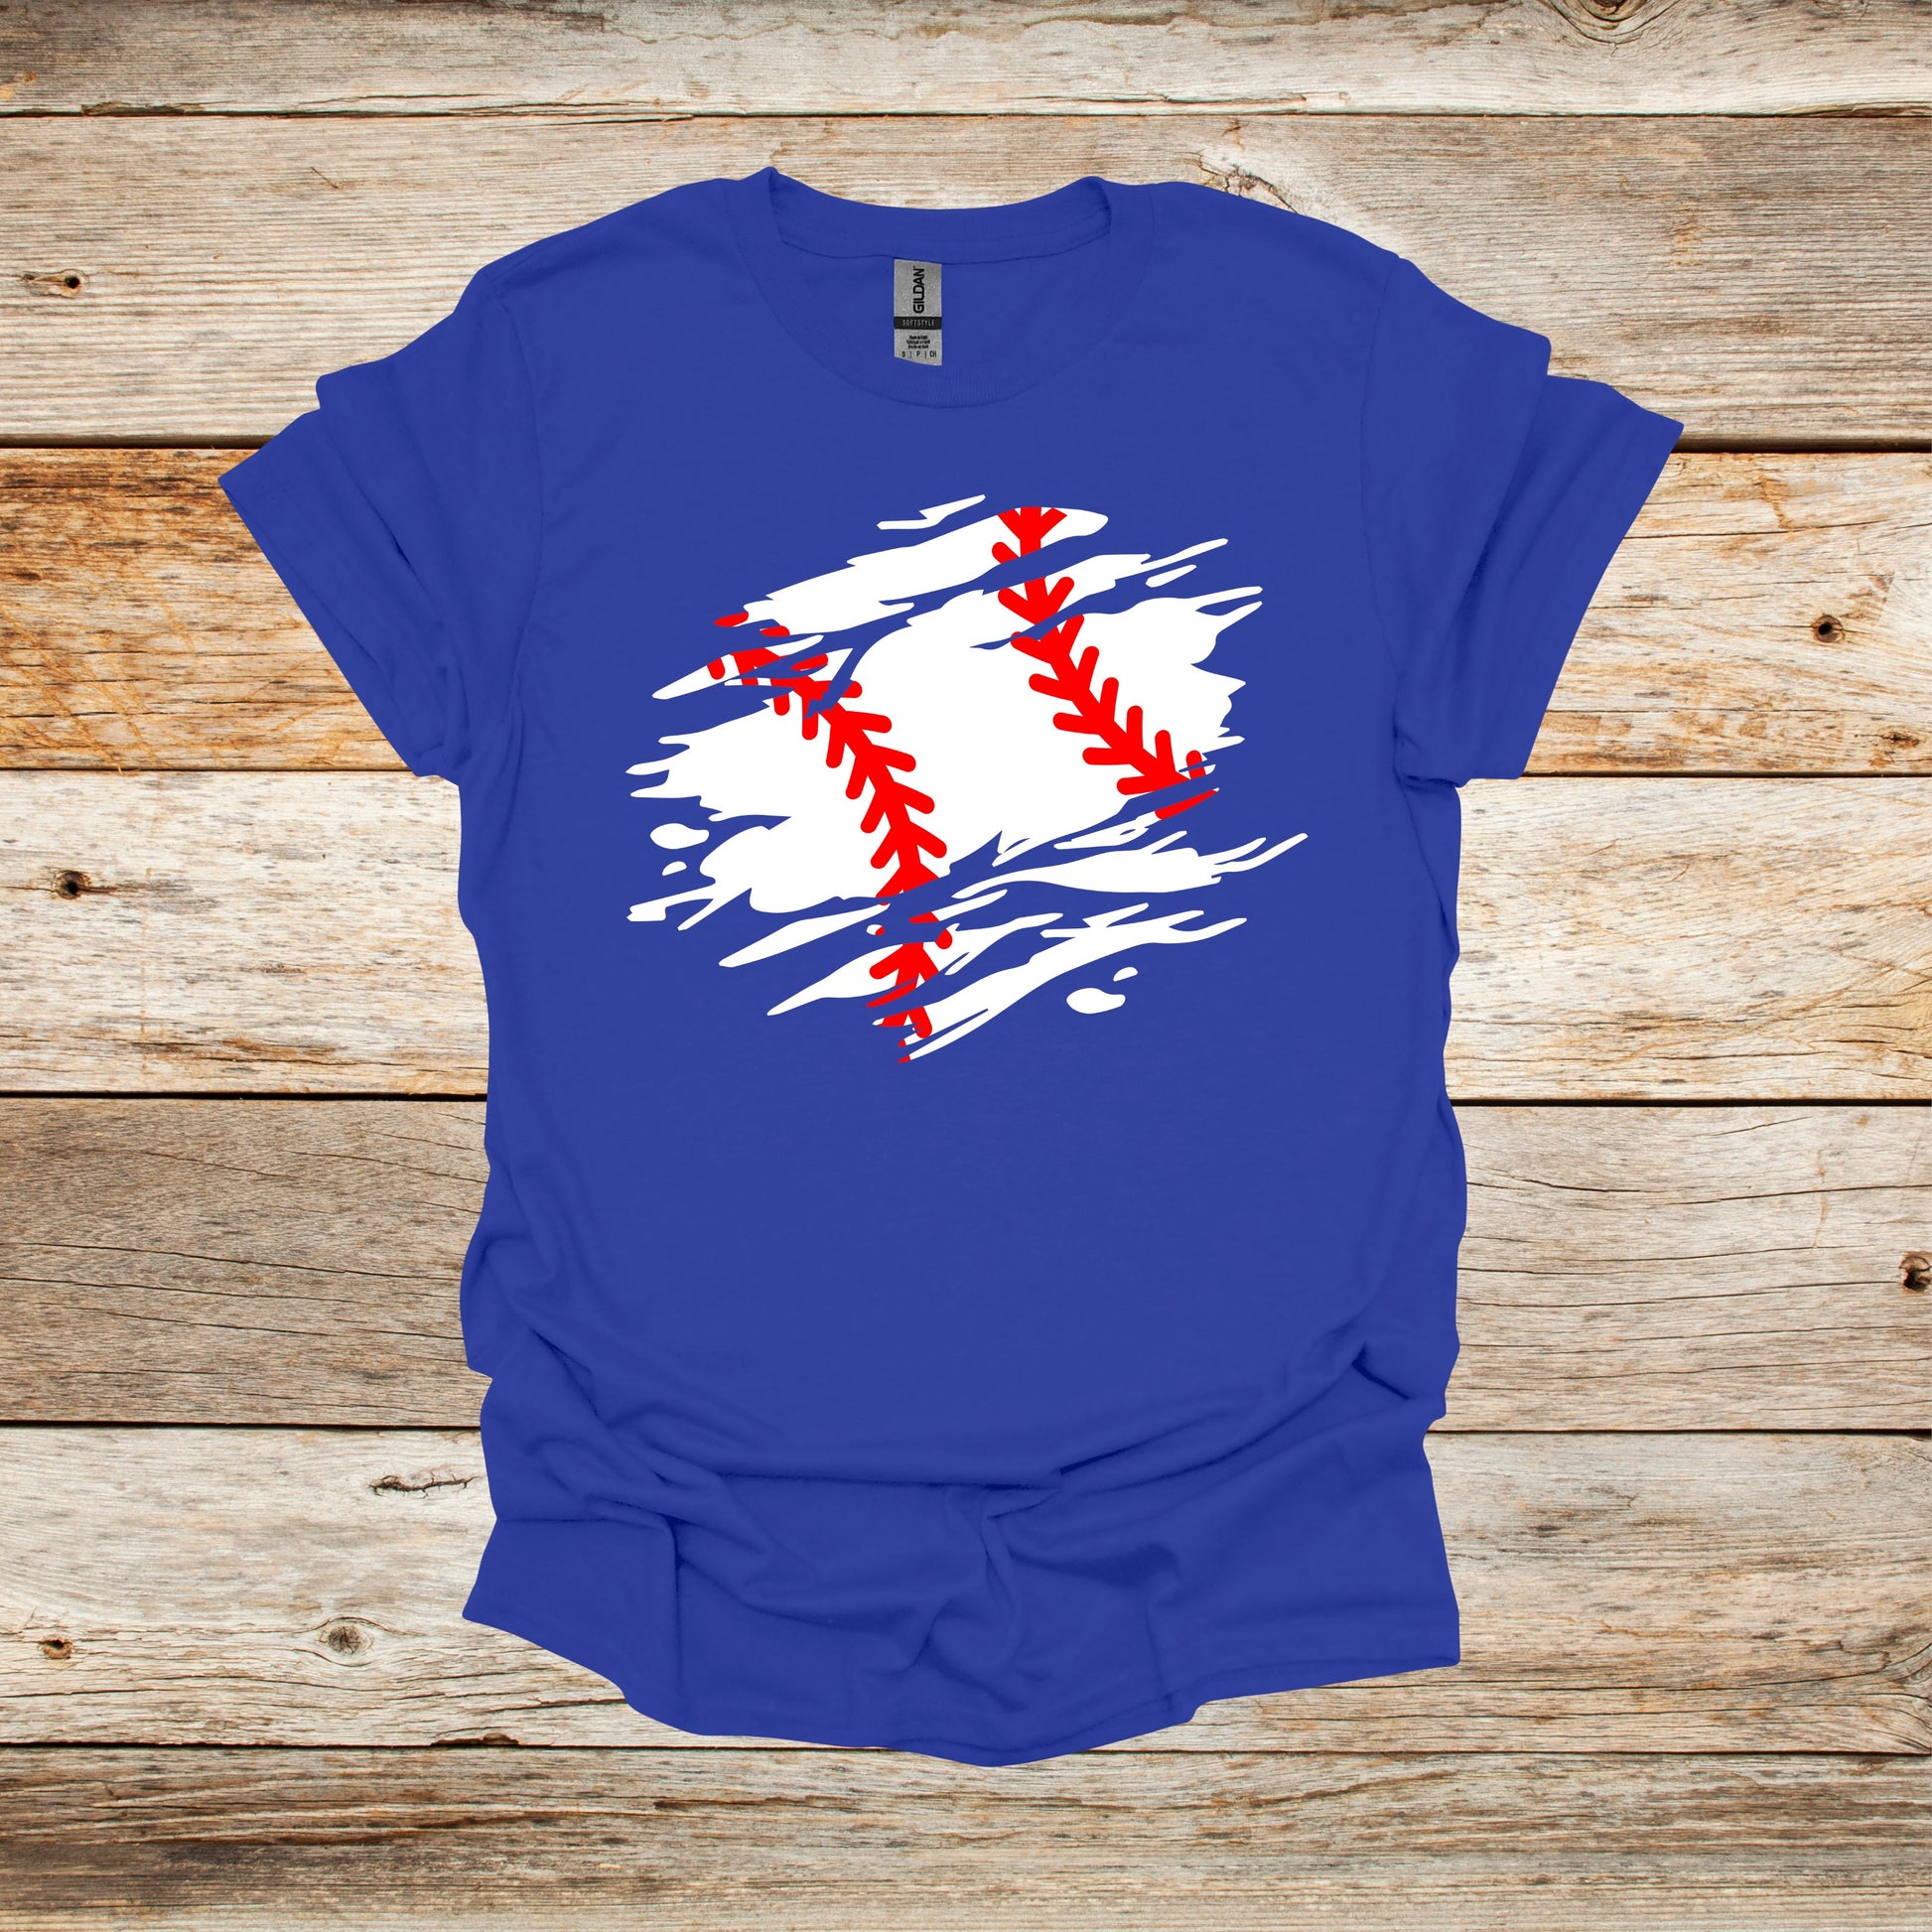 Baseball T-Shirt - Adult and Children's Tee Shirts - Sports T-Shirts Graphic Avenue Royal Blue Adult Small 